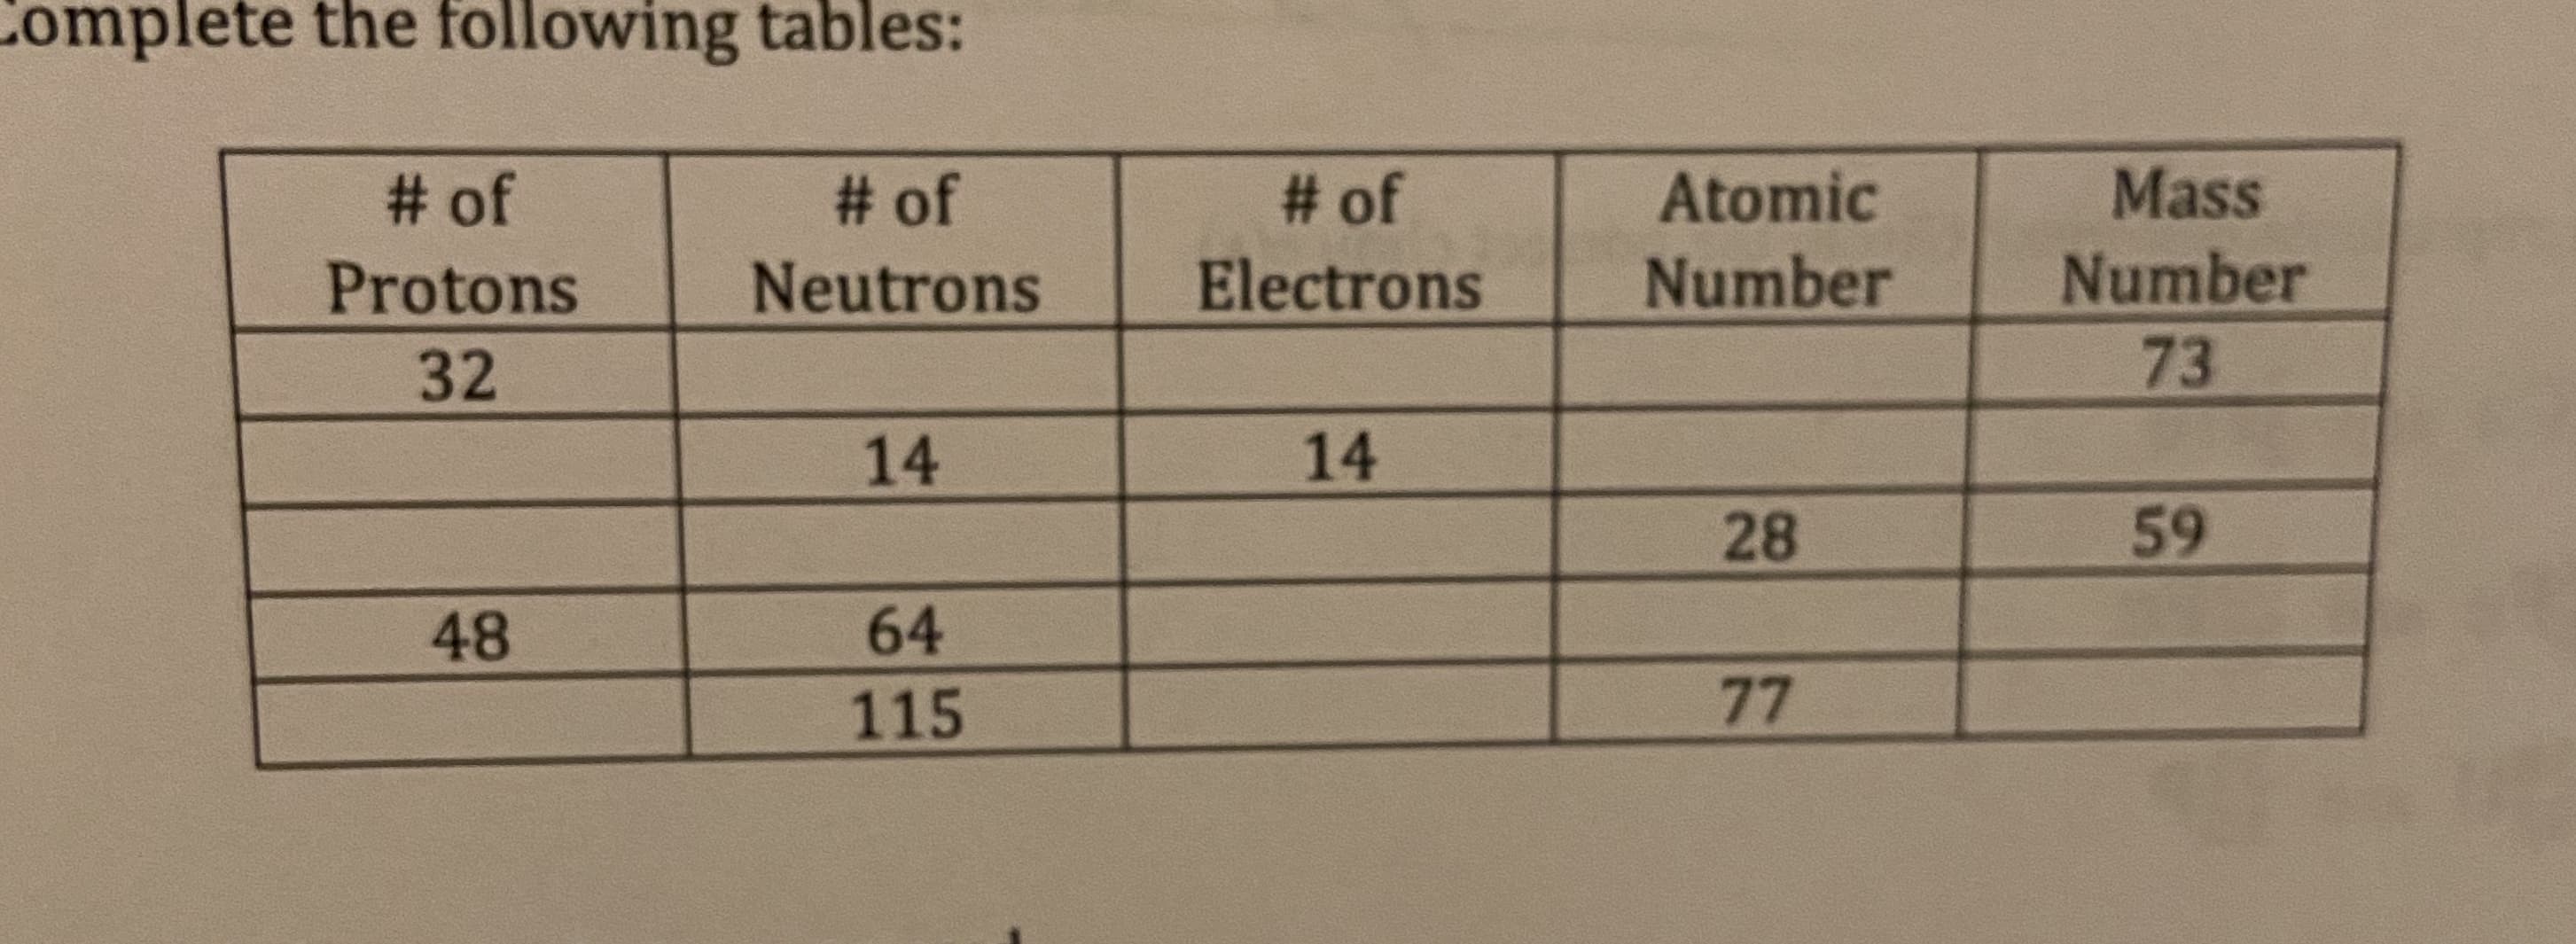 # of
# of
# of
Atomic
Mass
Protons
Neutrons
Electrons
Number
Number
32
73
14
14
28
48
64
115
77
59
